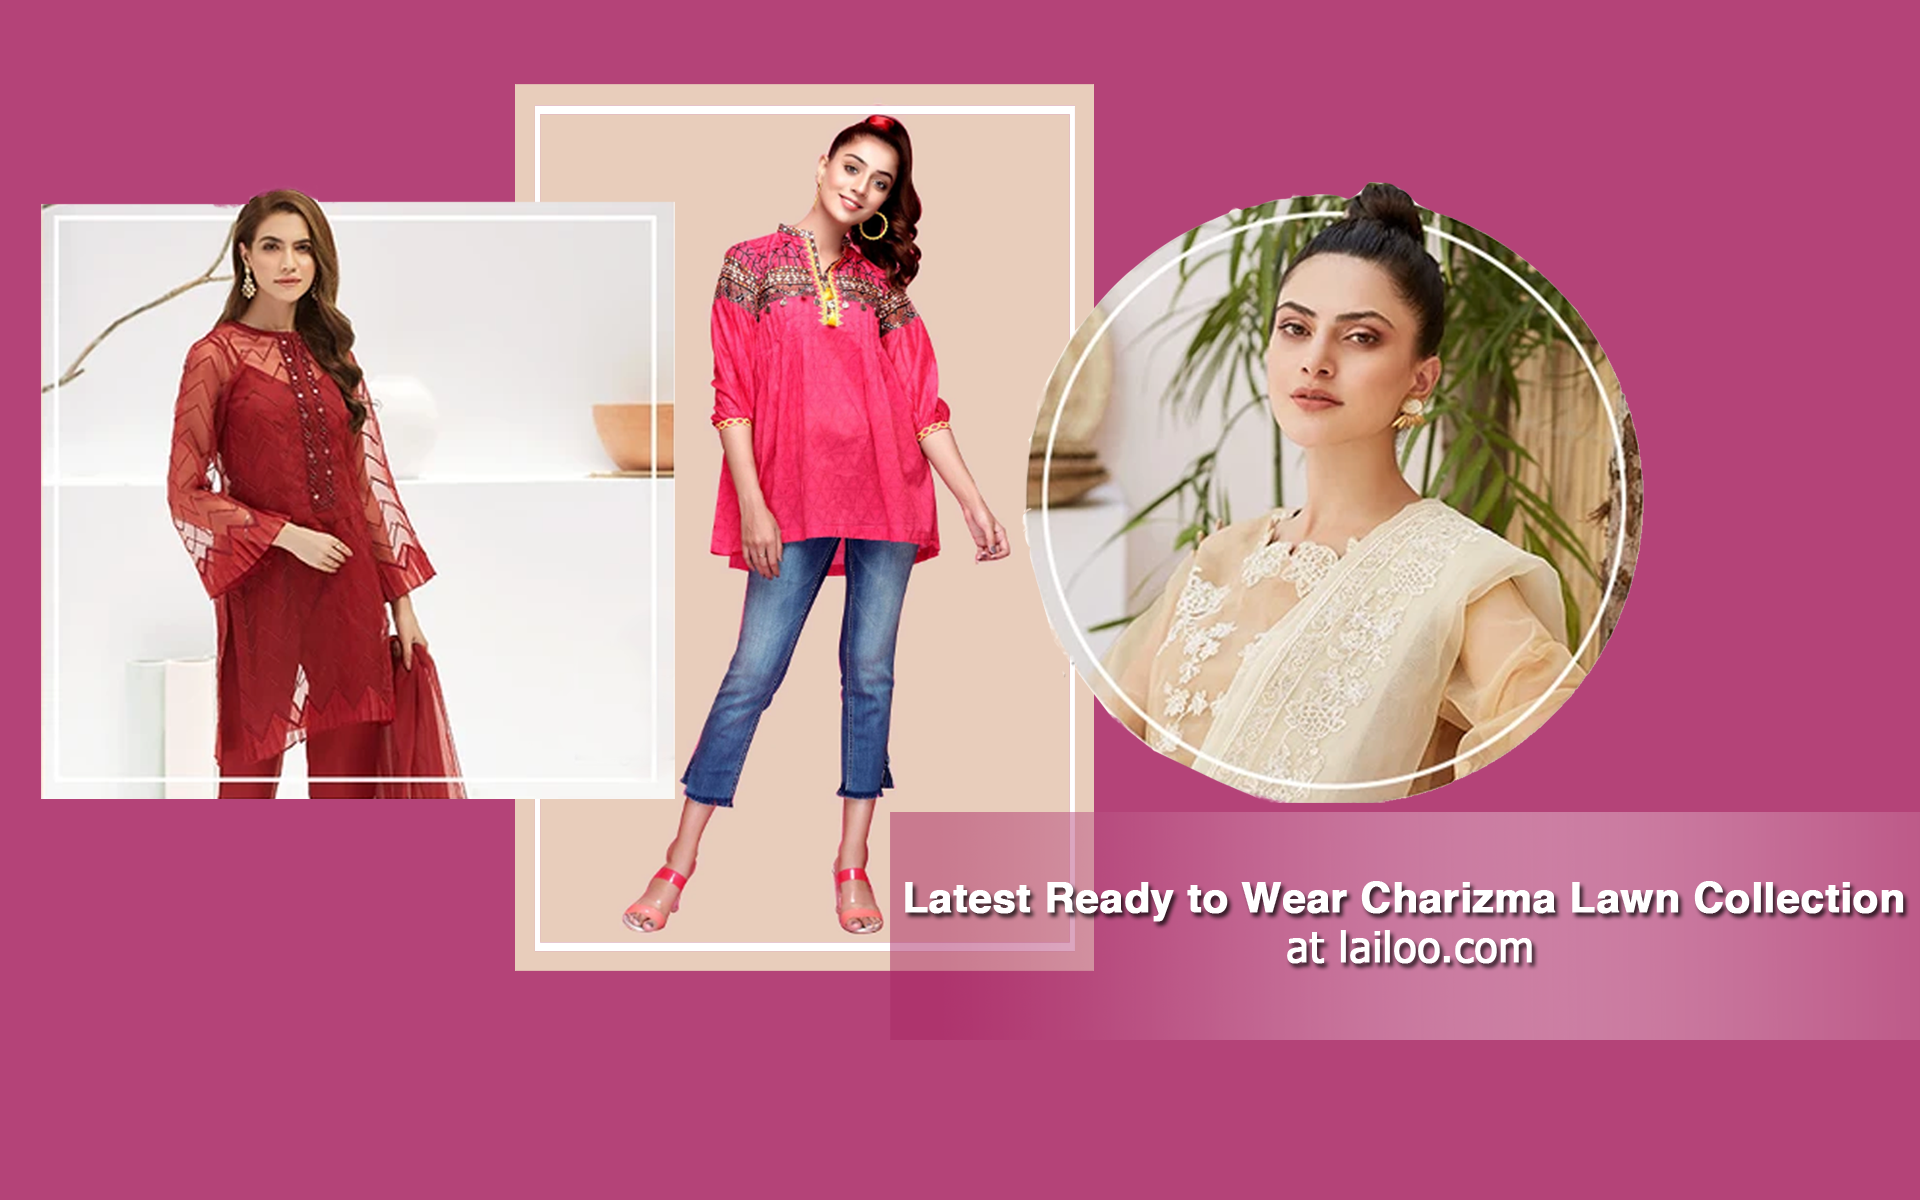 Latest ready to wear Charizma lawn collection